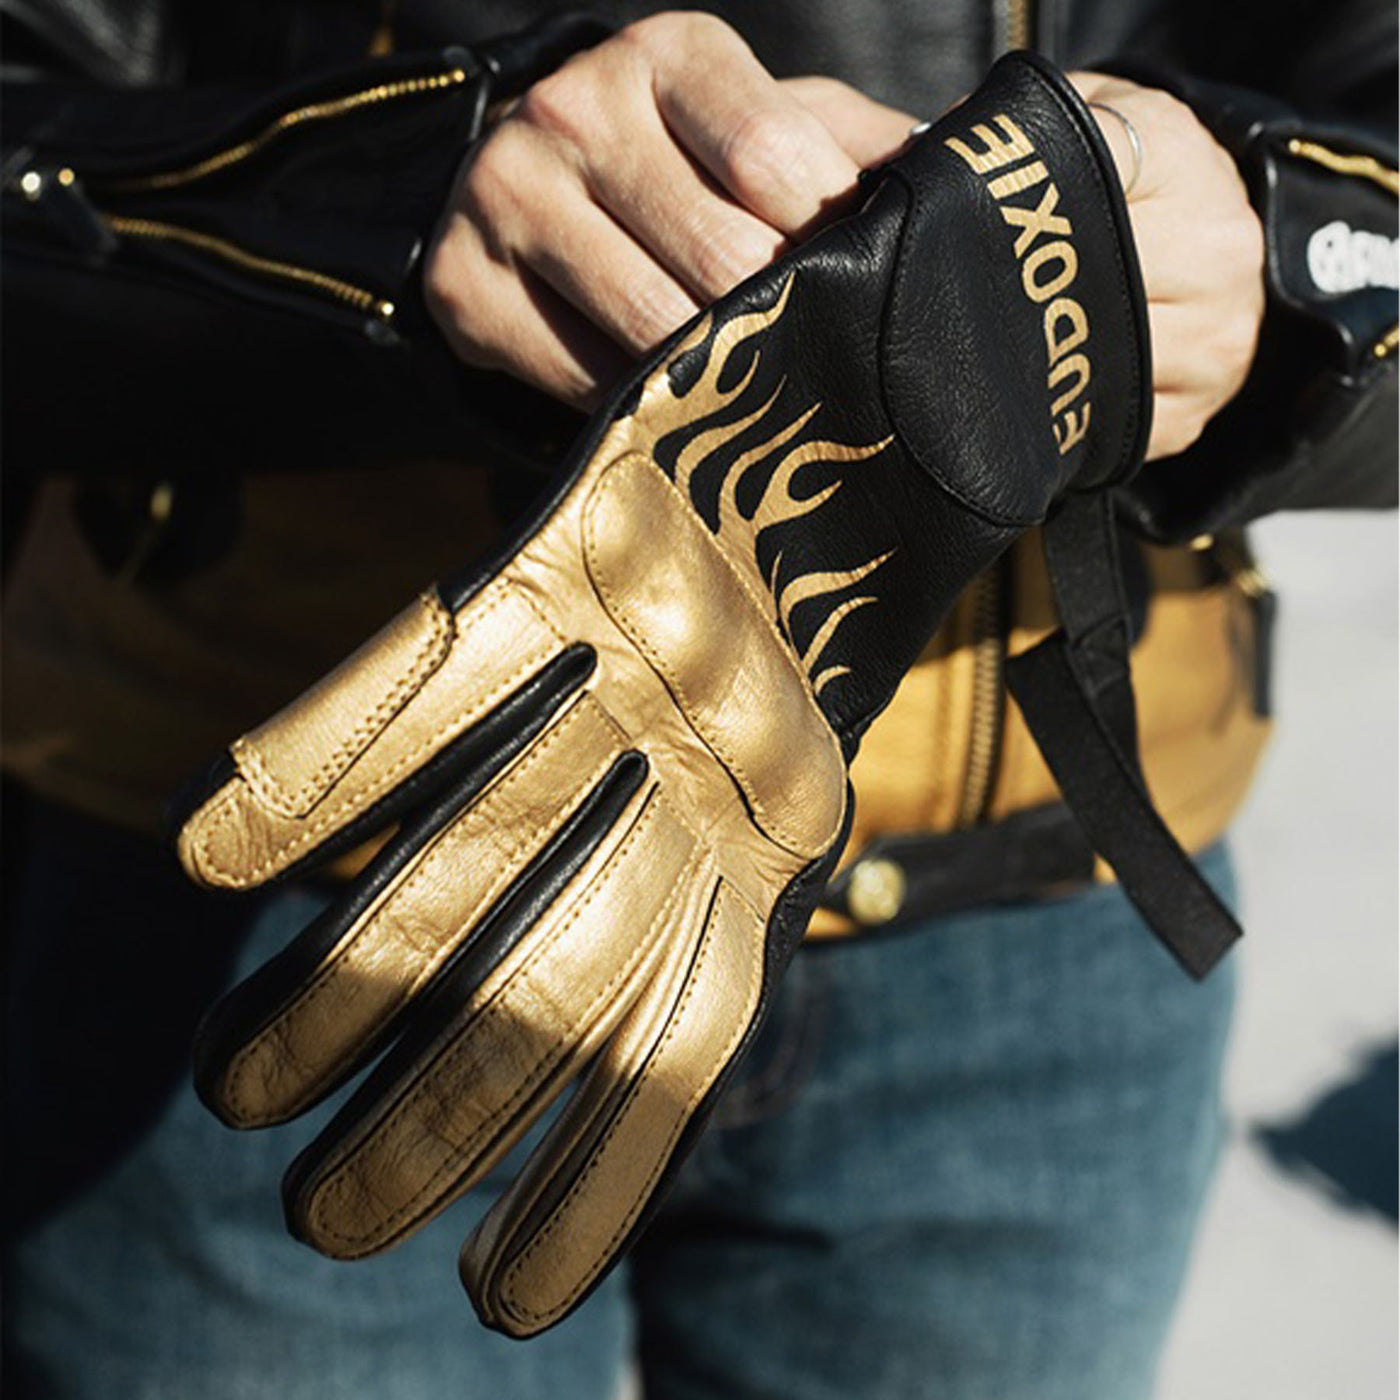 Eudoxie Leather Gloves Power